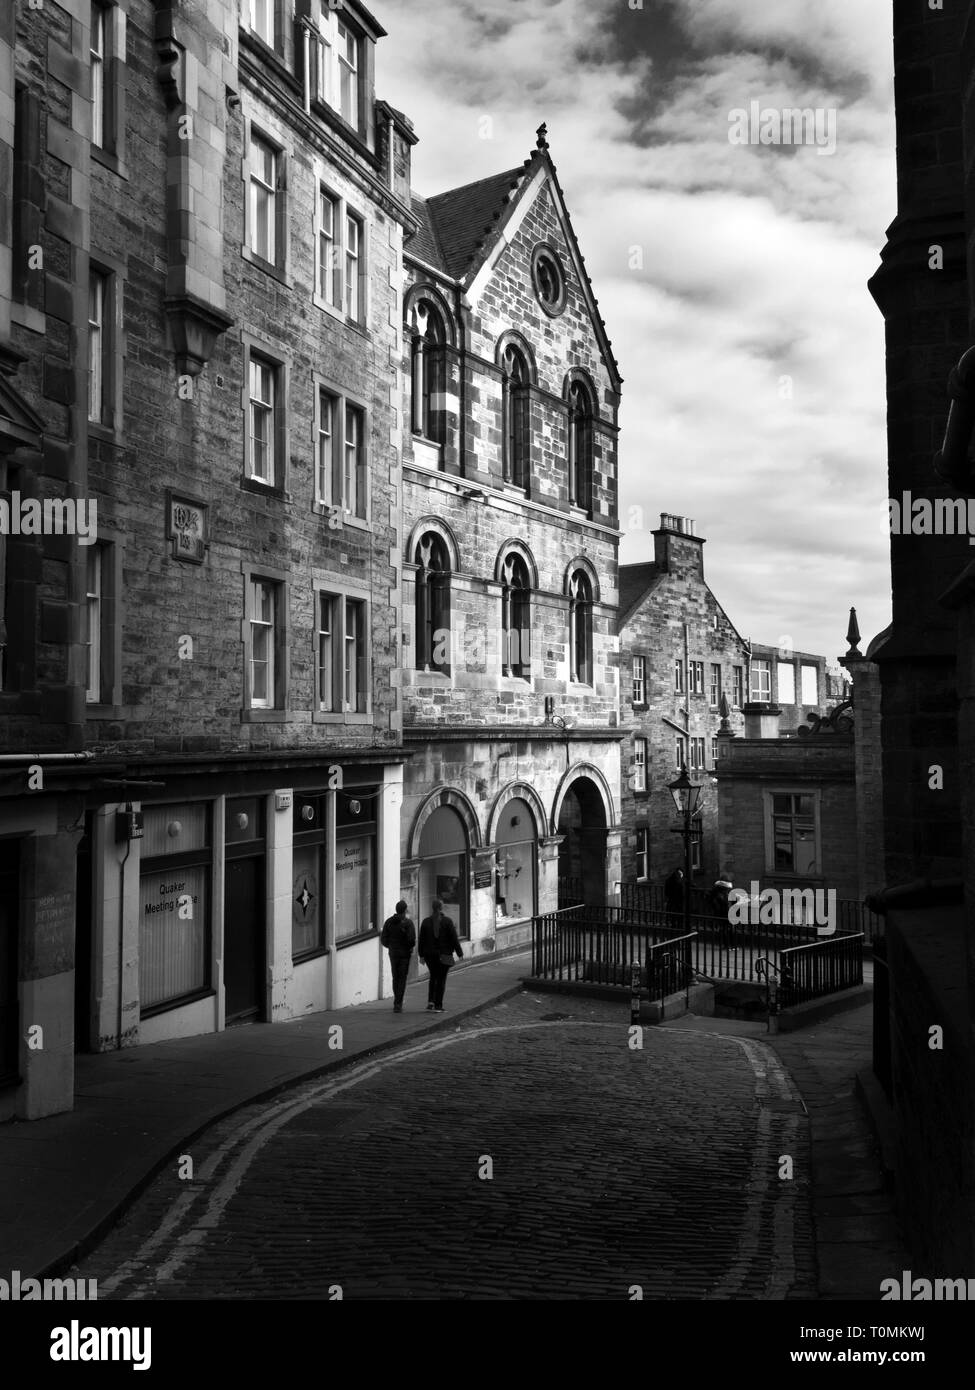 Two figures walking along Upper Bow off the Royal Mile in the Old Town in Edinburgh Scotland Stock Photo